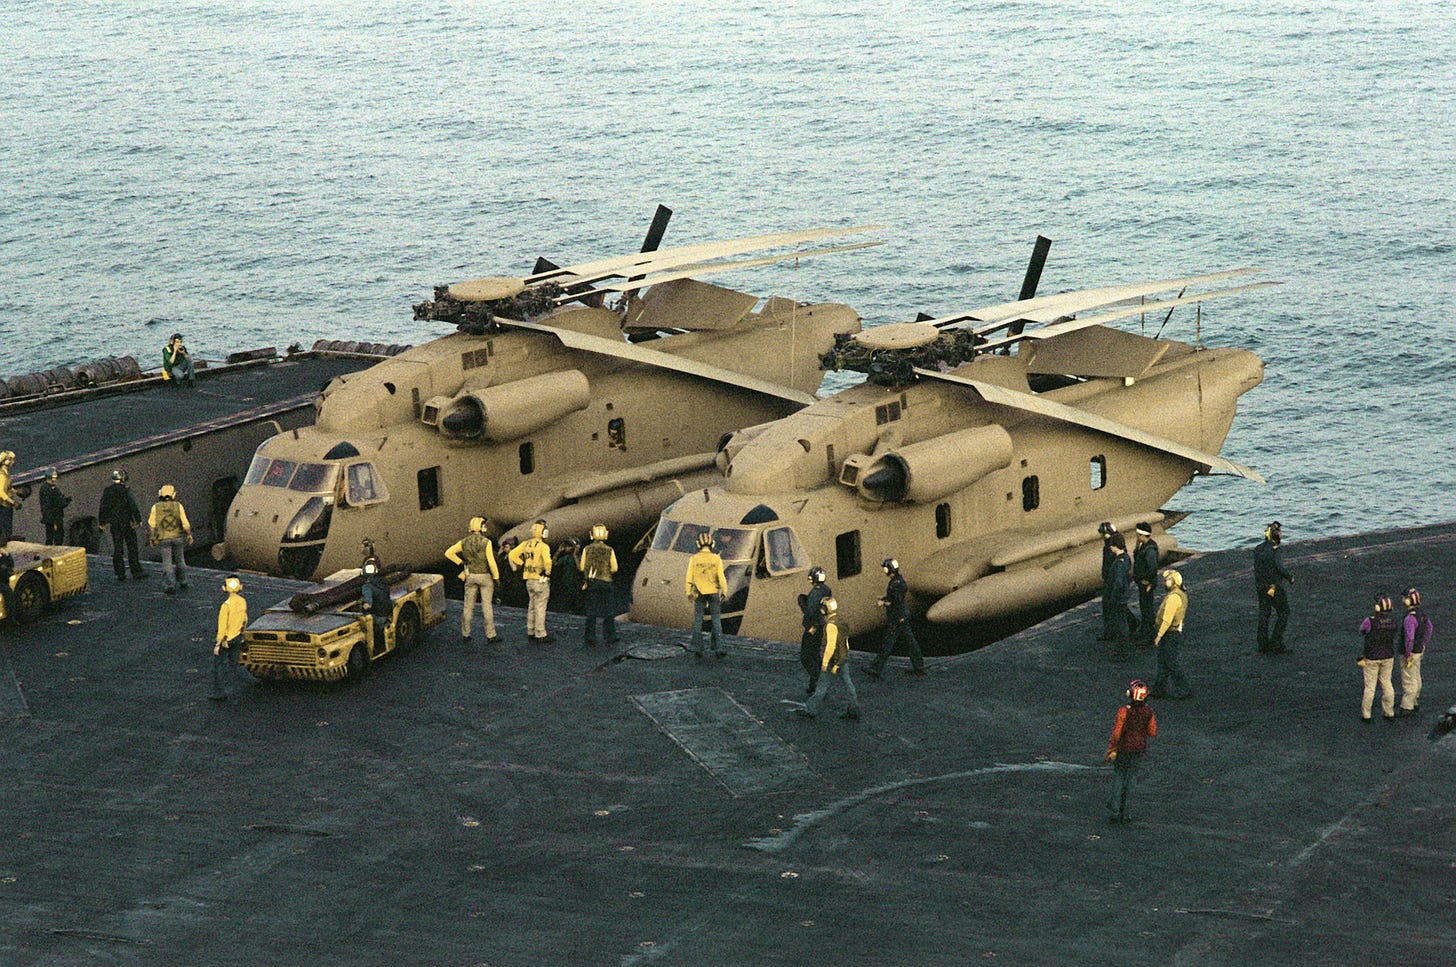 Wikipedia explanation of this picture: Two U.S. Navy Sikorsky RH-53D Sea Stallion helicopters of helicopter mine countermeasures squadron HM-16 Sea Hawks are brought to the flight deck of the aircraft carrier USS Nimitz (CVN-68) during "Operation Evening Light" (Eagle Claw), in the Arabian Sea on 24 April 1980.